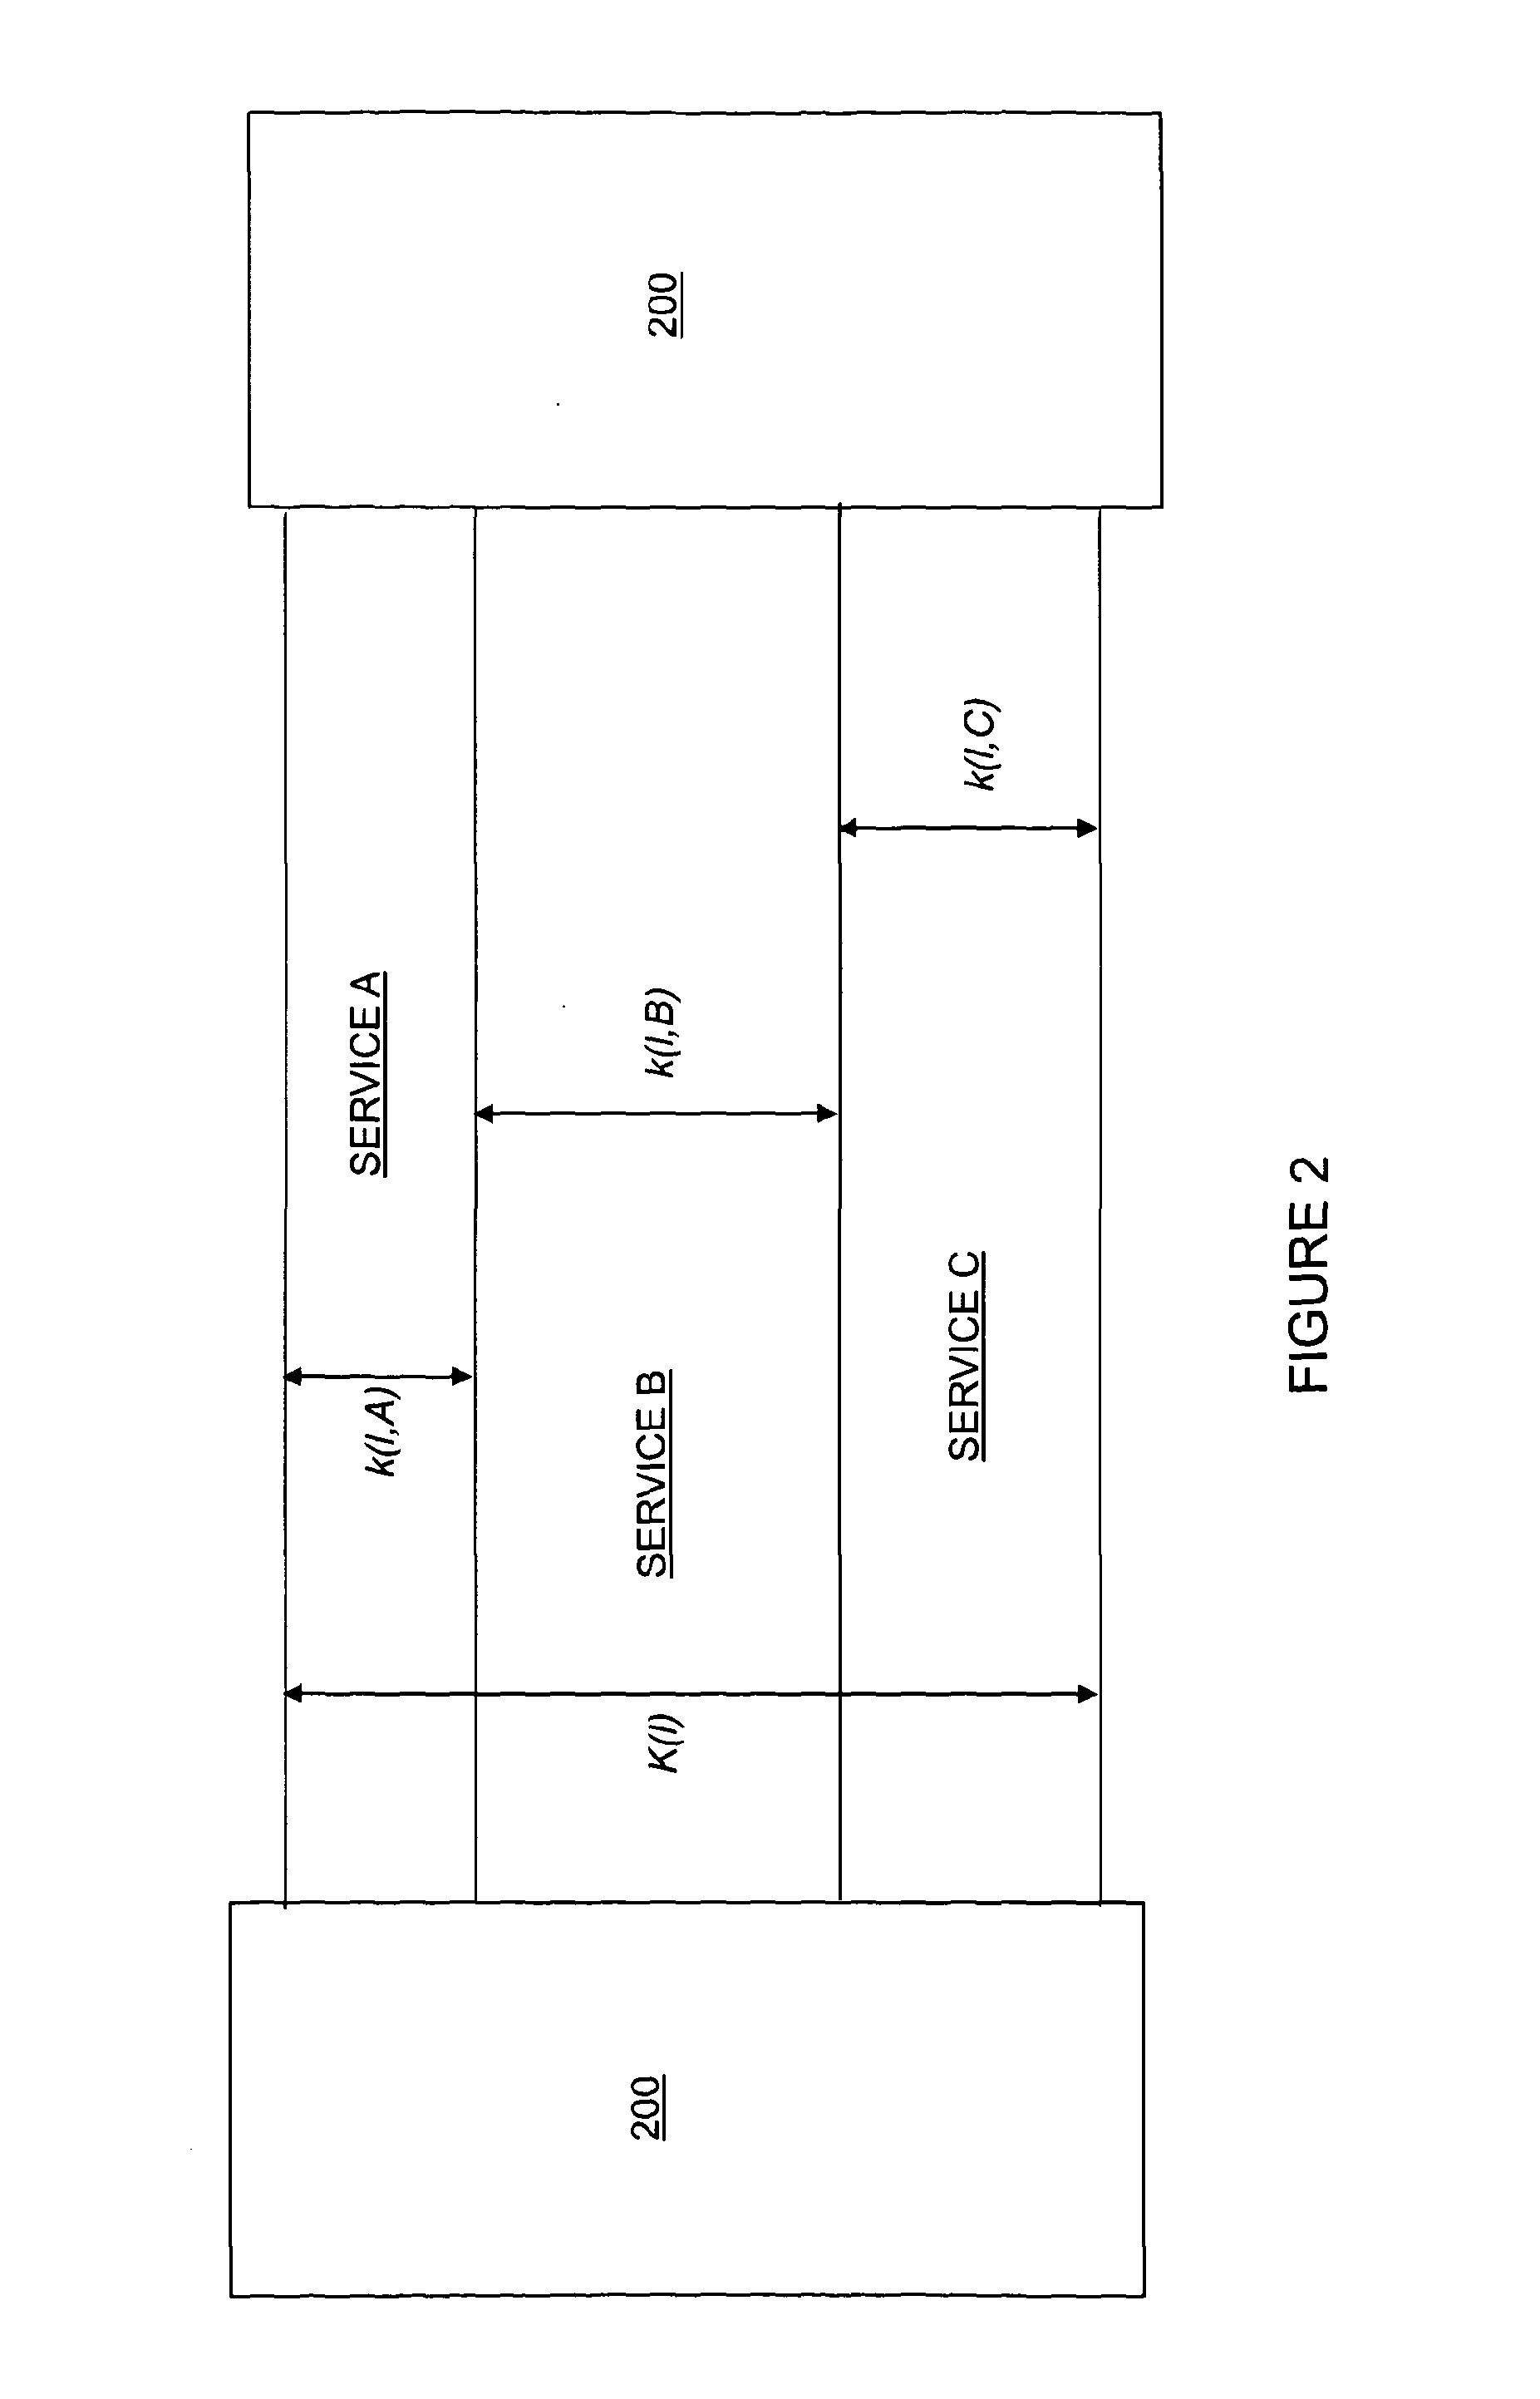 Capacity adaptation between services or classes in a packet network